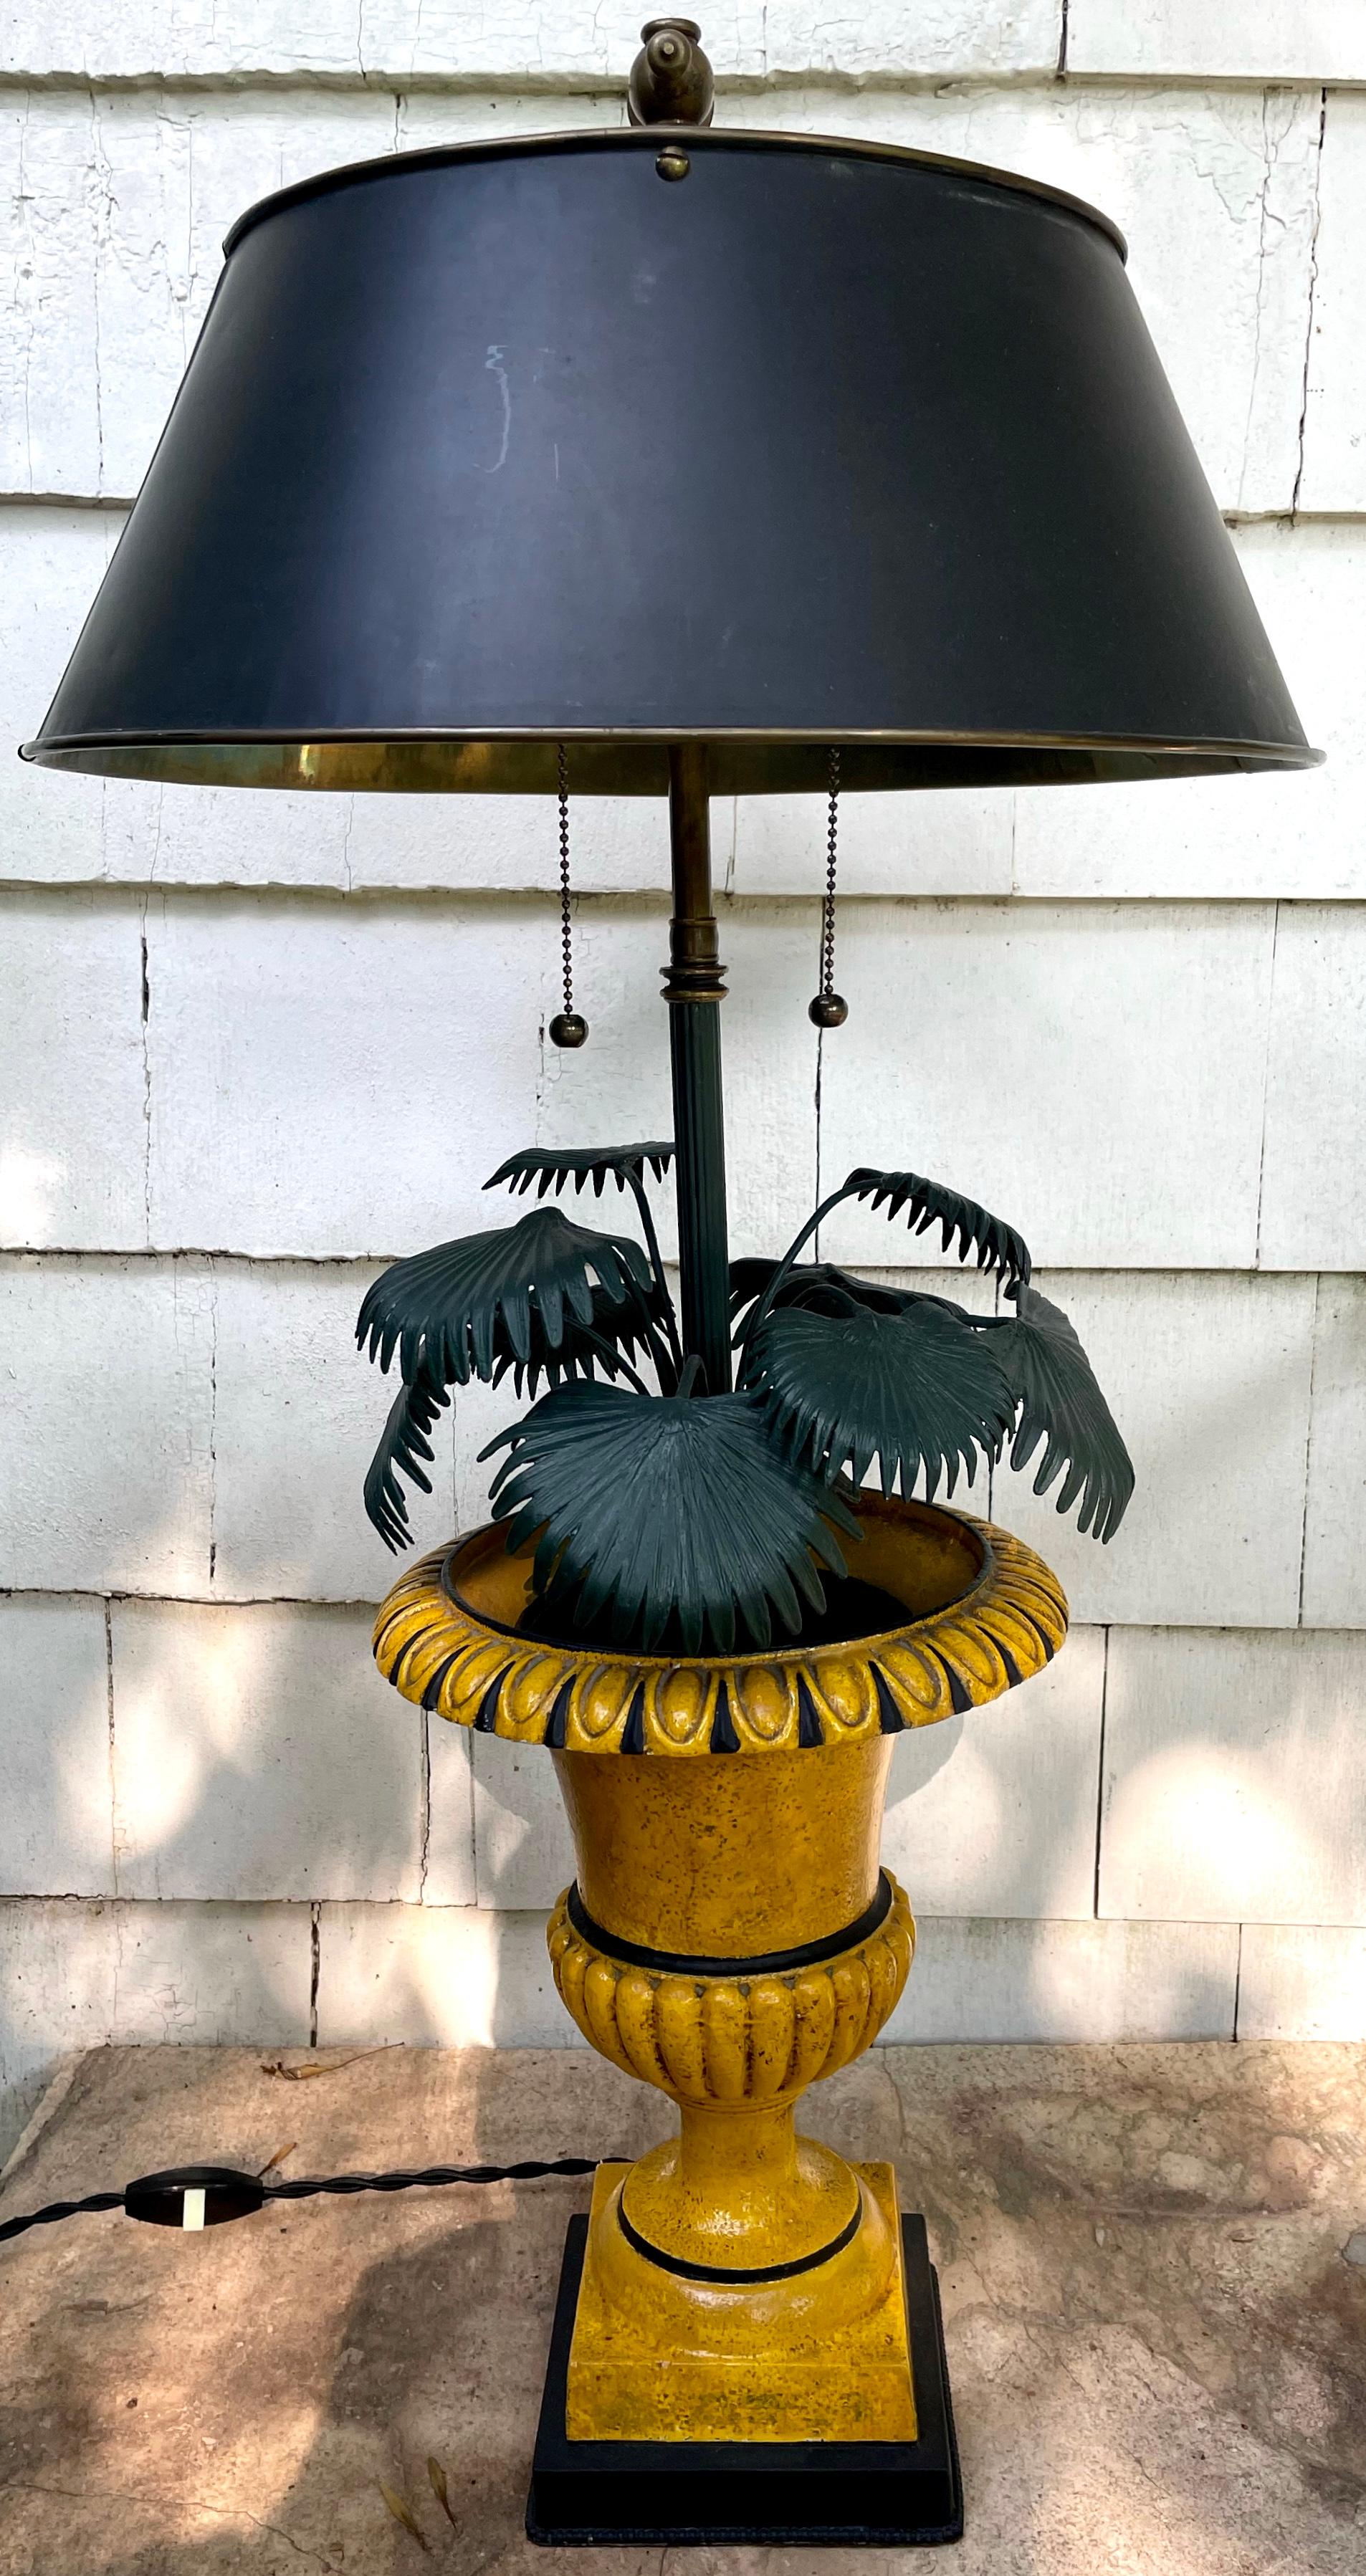 Green and yellow potted palm urn lamp. French green painted tole palm tree lamp newly rewired in yellow and black painted metal urn. France 1910’s
Dimensions: Urn 9.5” diameter x  13” high to top of urn; 29” high to finial; base 5.5